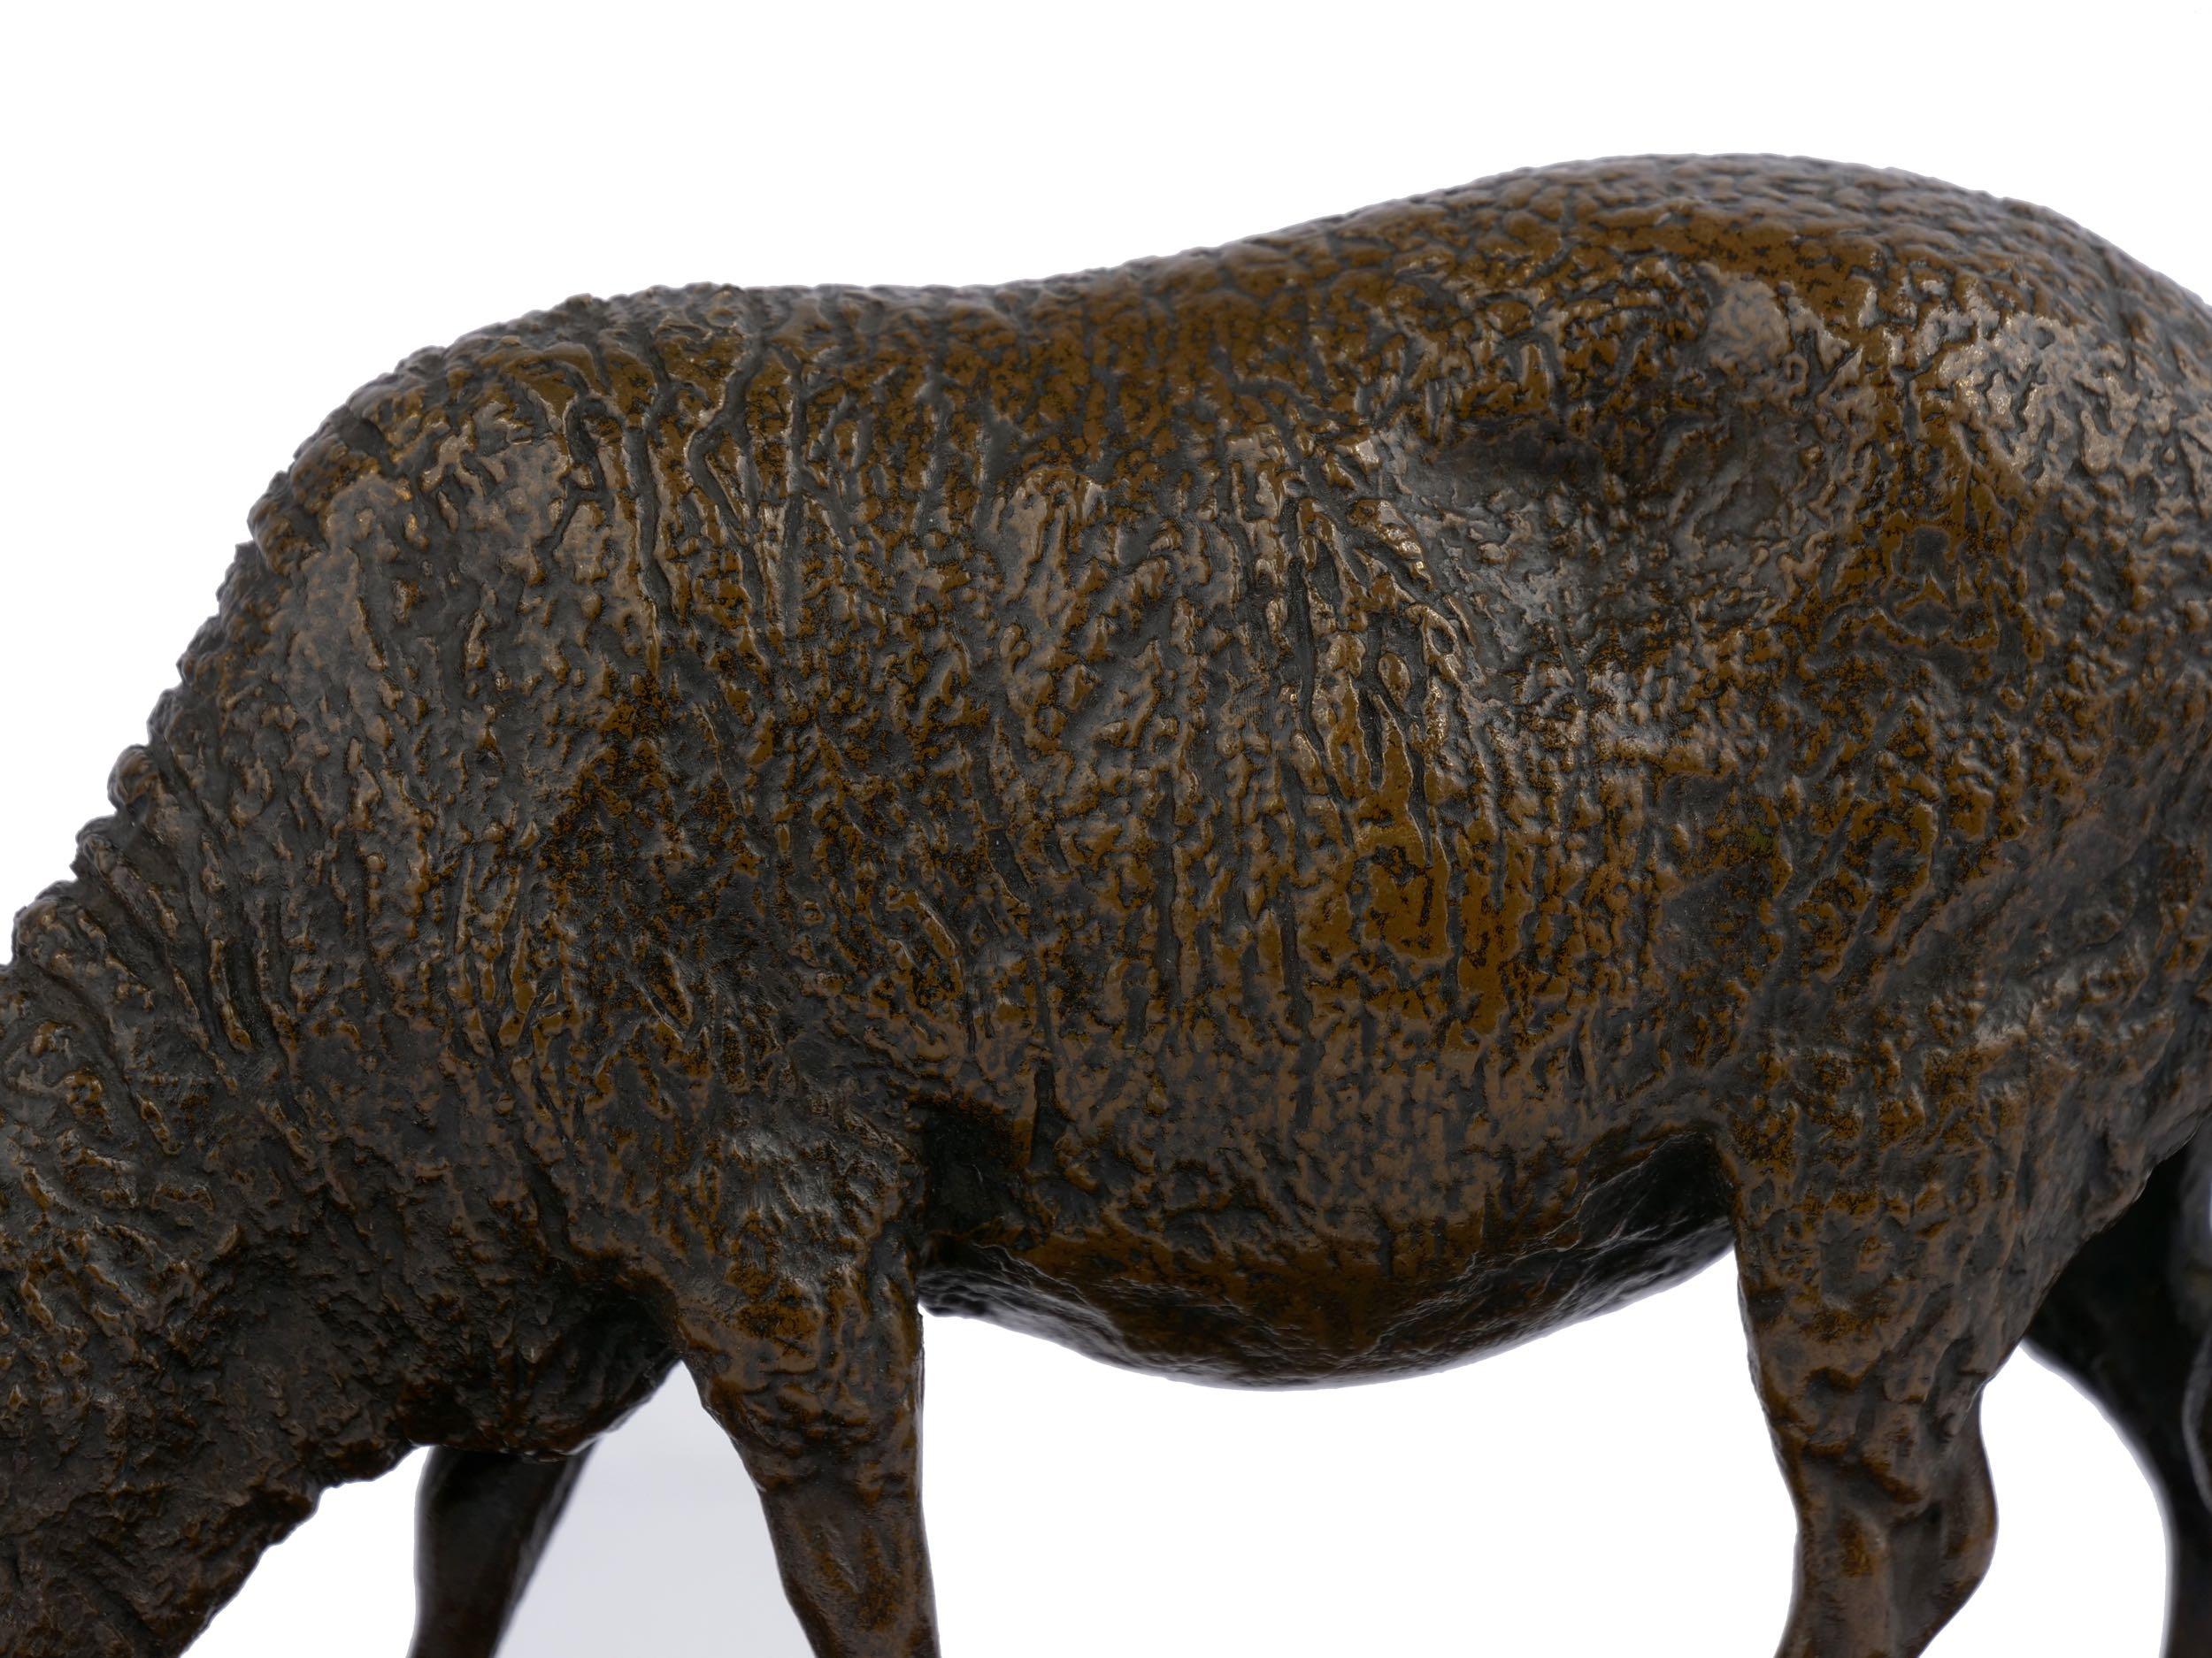 Antique French Bronze Sculpture of Sheep by Rosa Bonheur, 19th Century 6